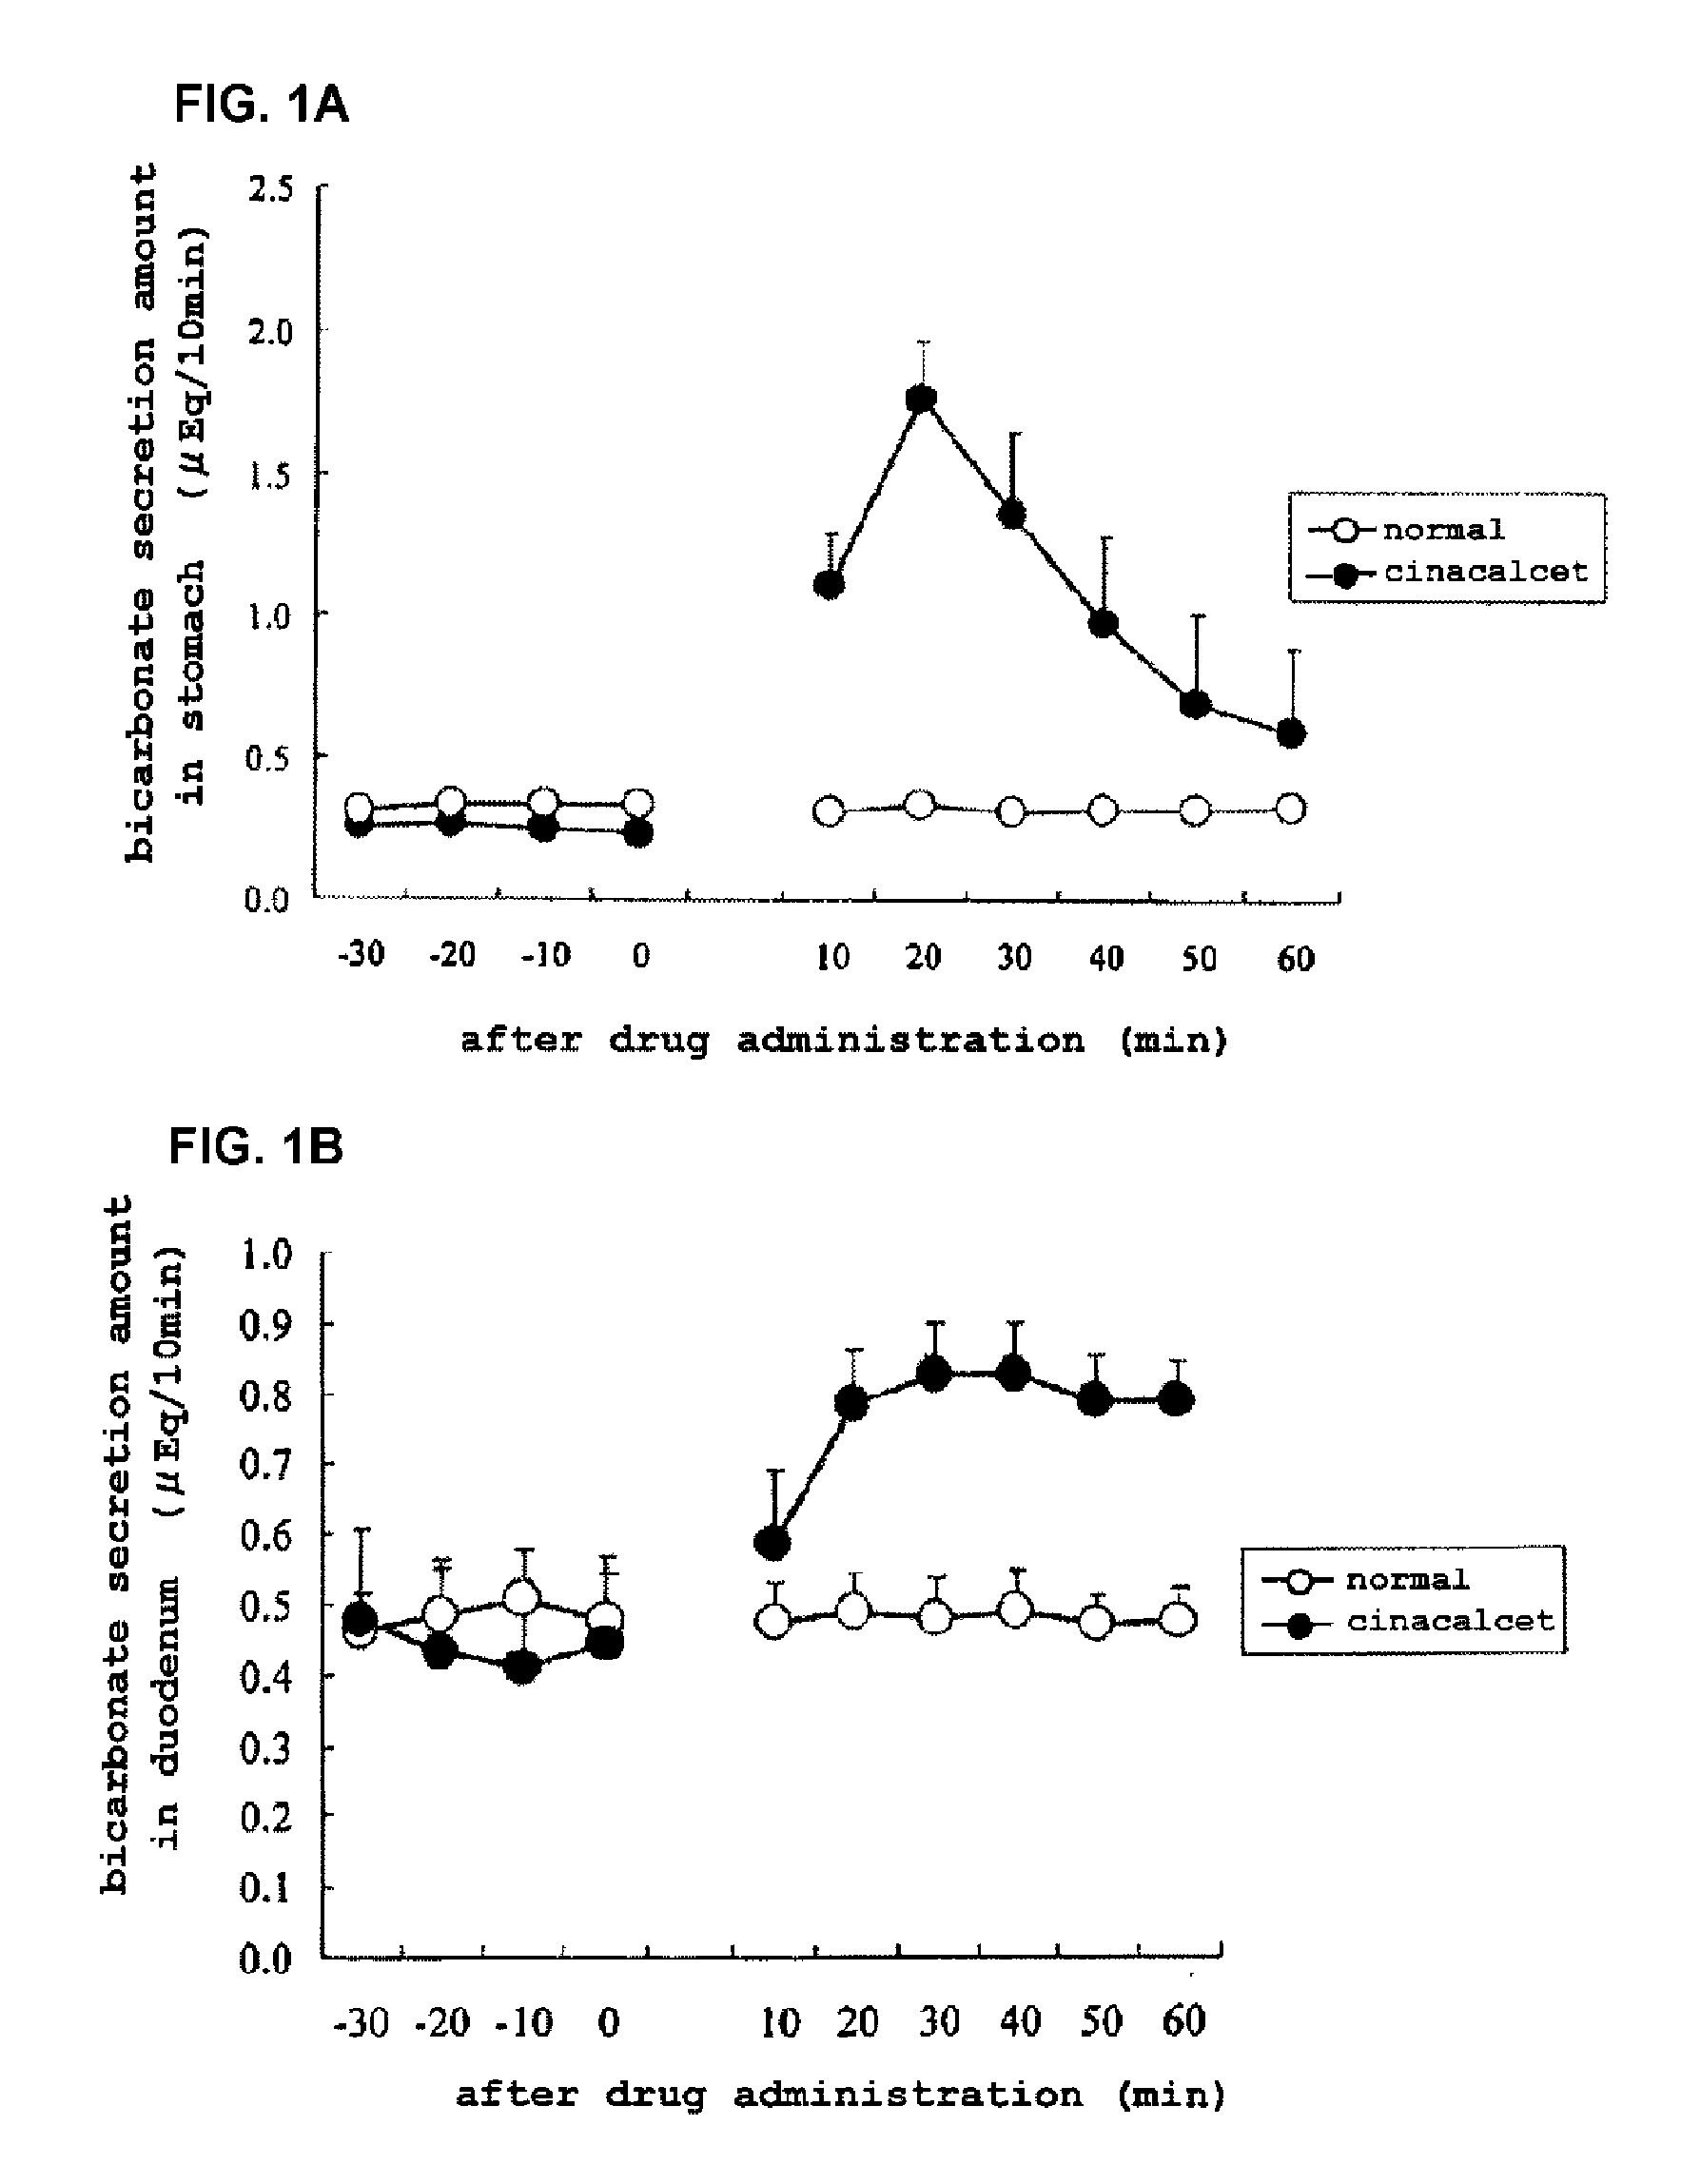 Promoter for bicarbonate secretion in gastrointestinal tract